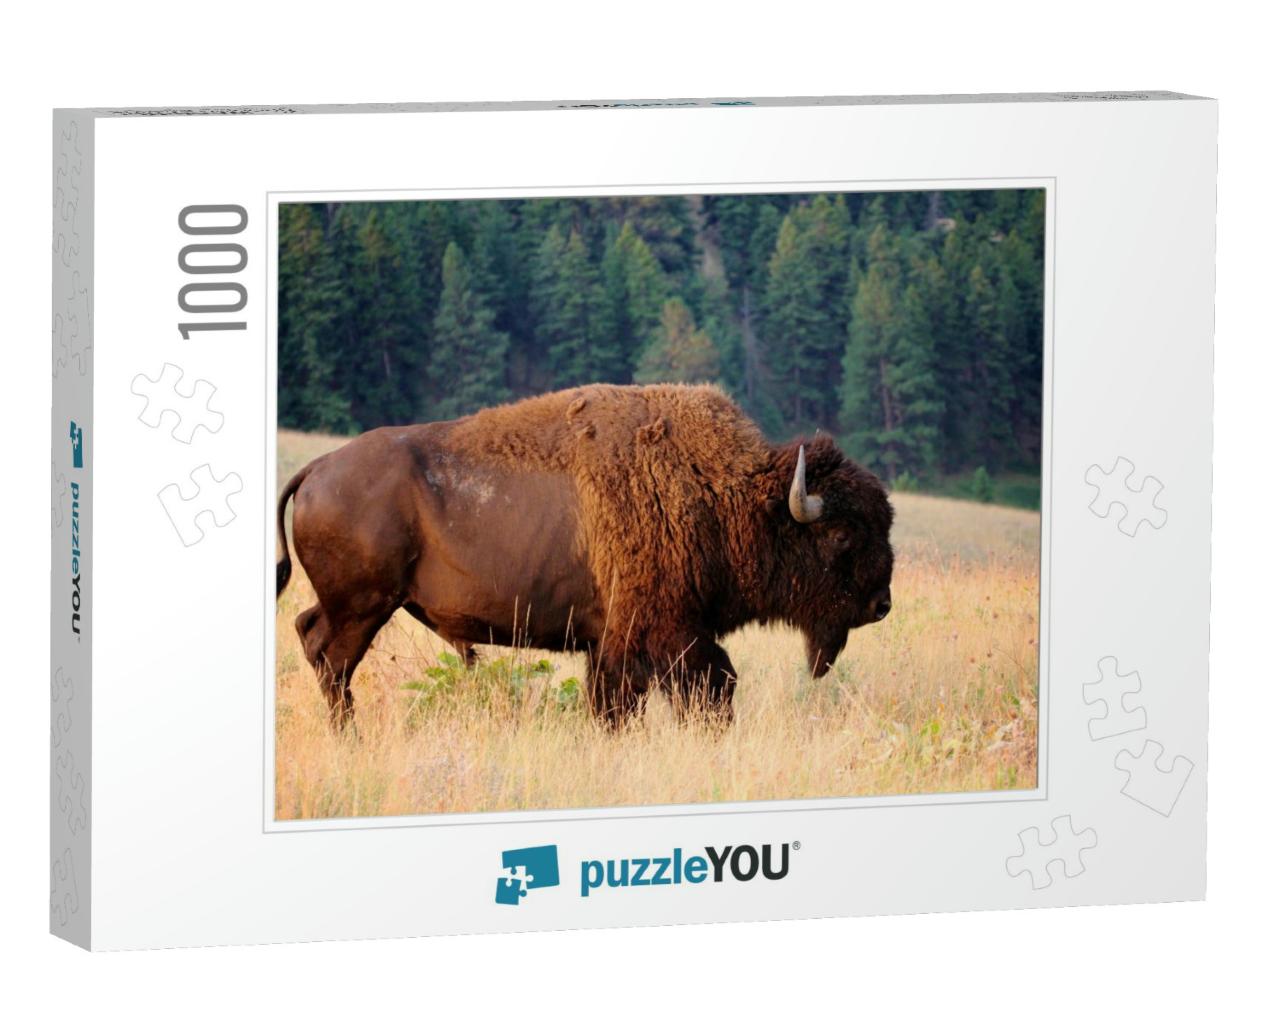 American Bison Buffalo Side Profile Early Morning in Mont... Jigsaw Puzzle with 1000 pieces